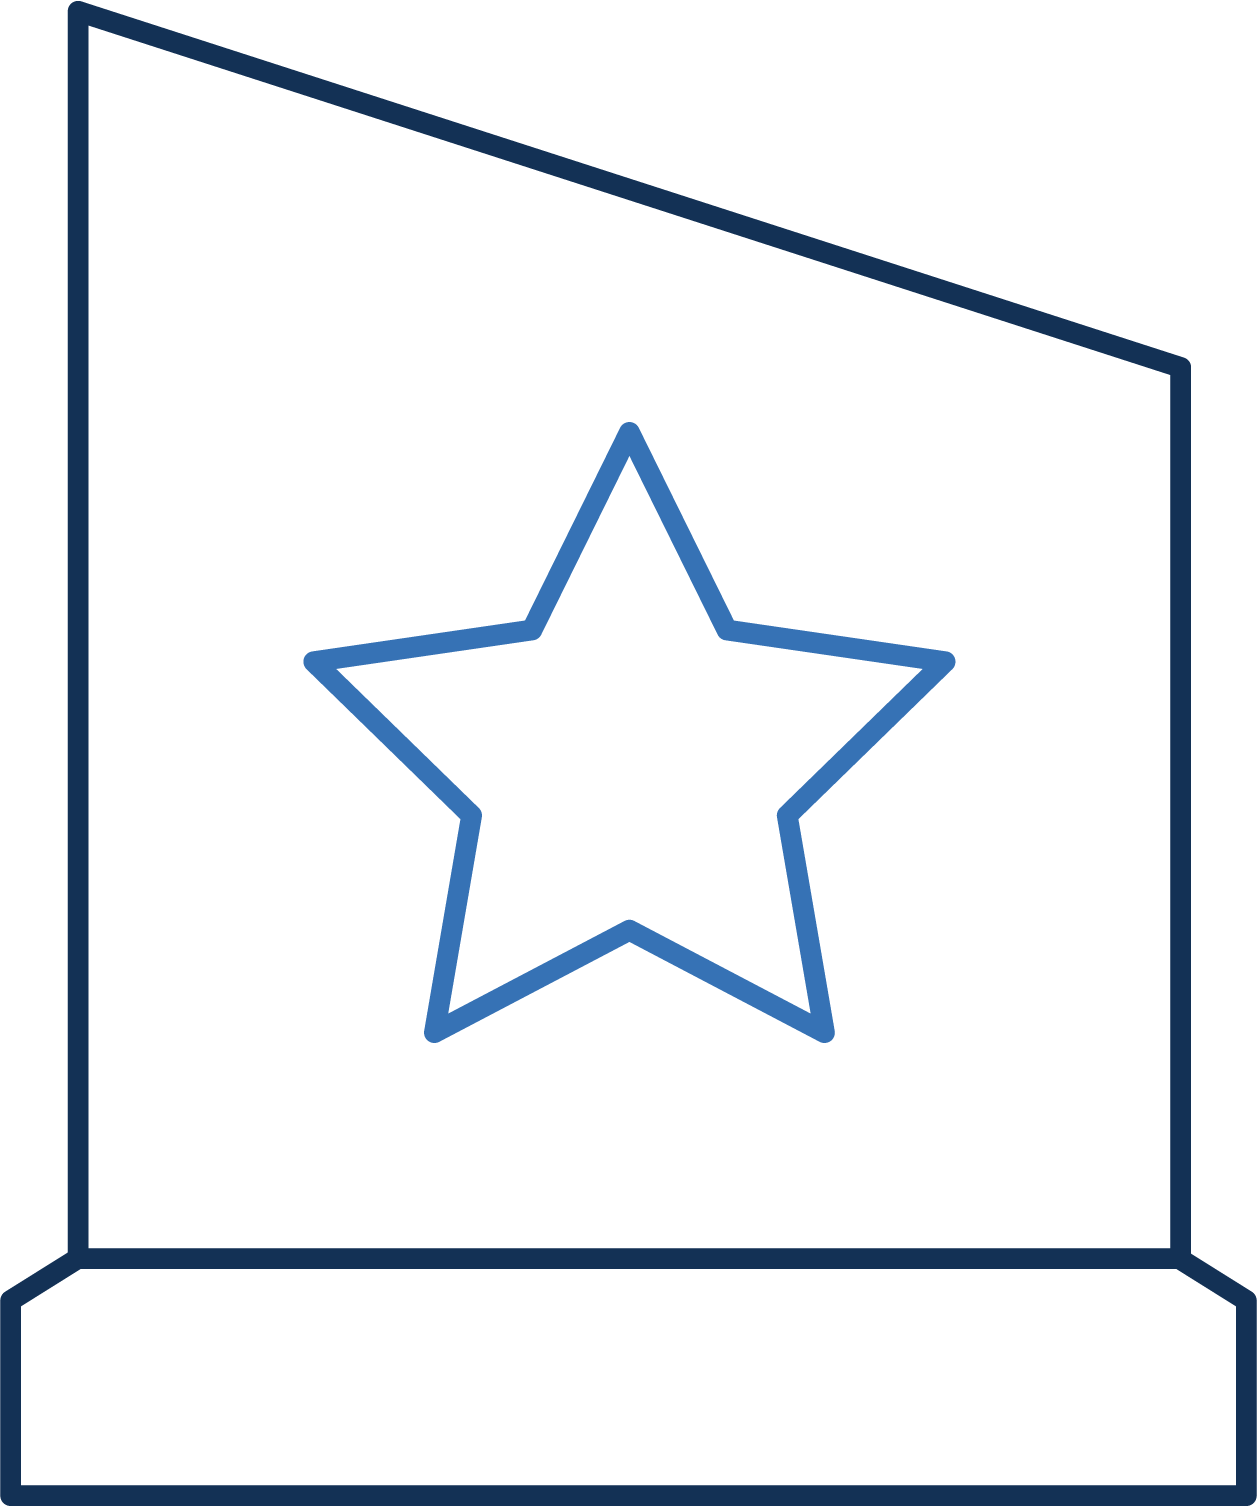 An icon of an physical award with a star inside it, representing award announcements, a type of Ntrepid news.